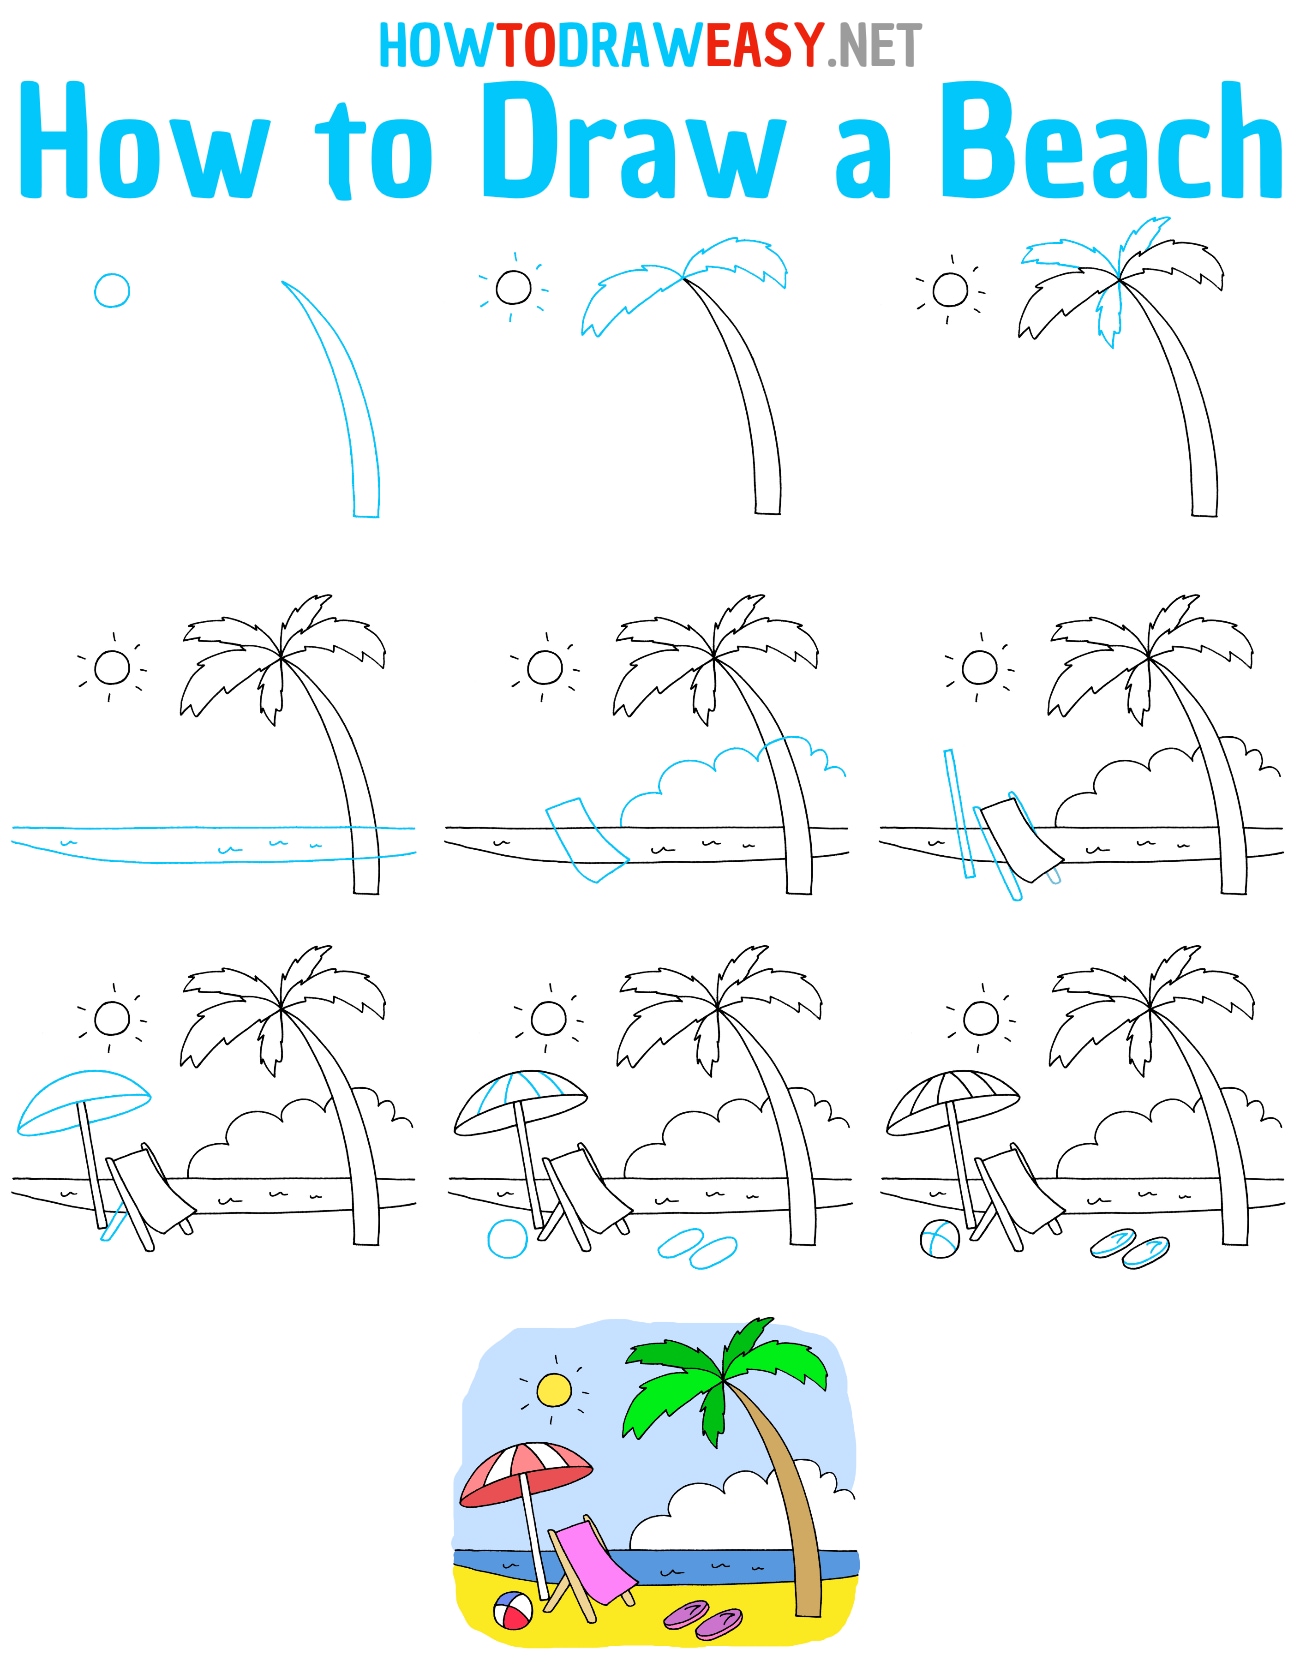 How to Draw a Beach Step by Step